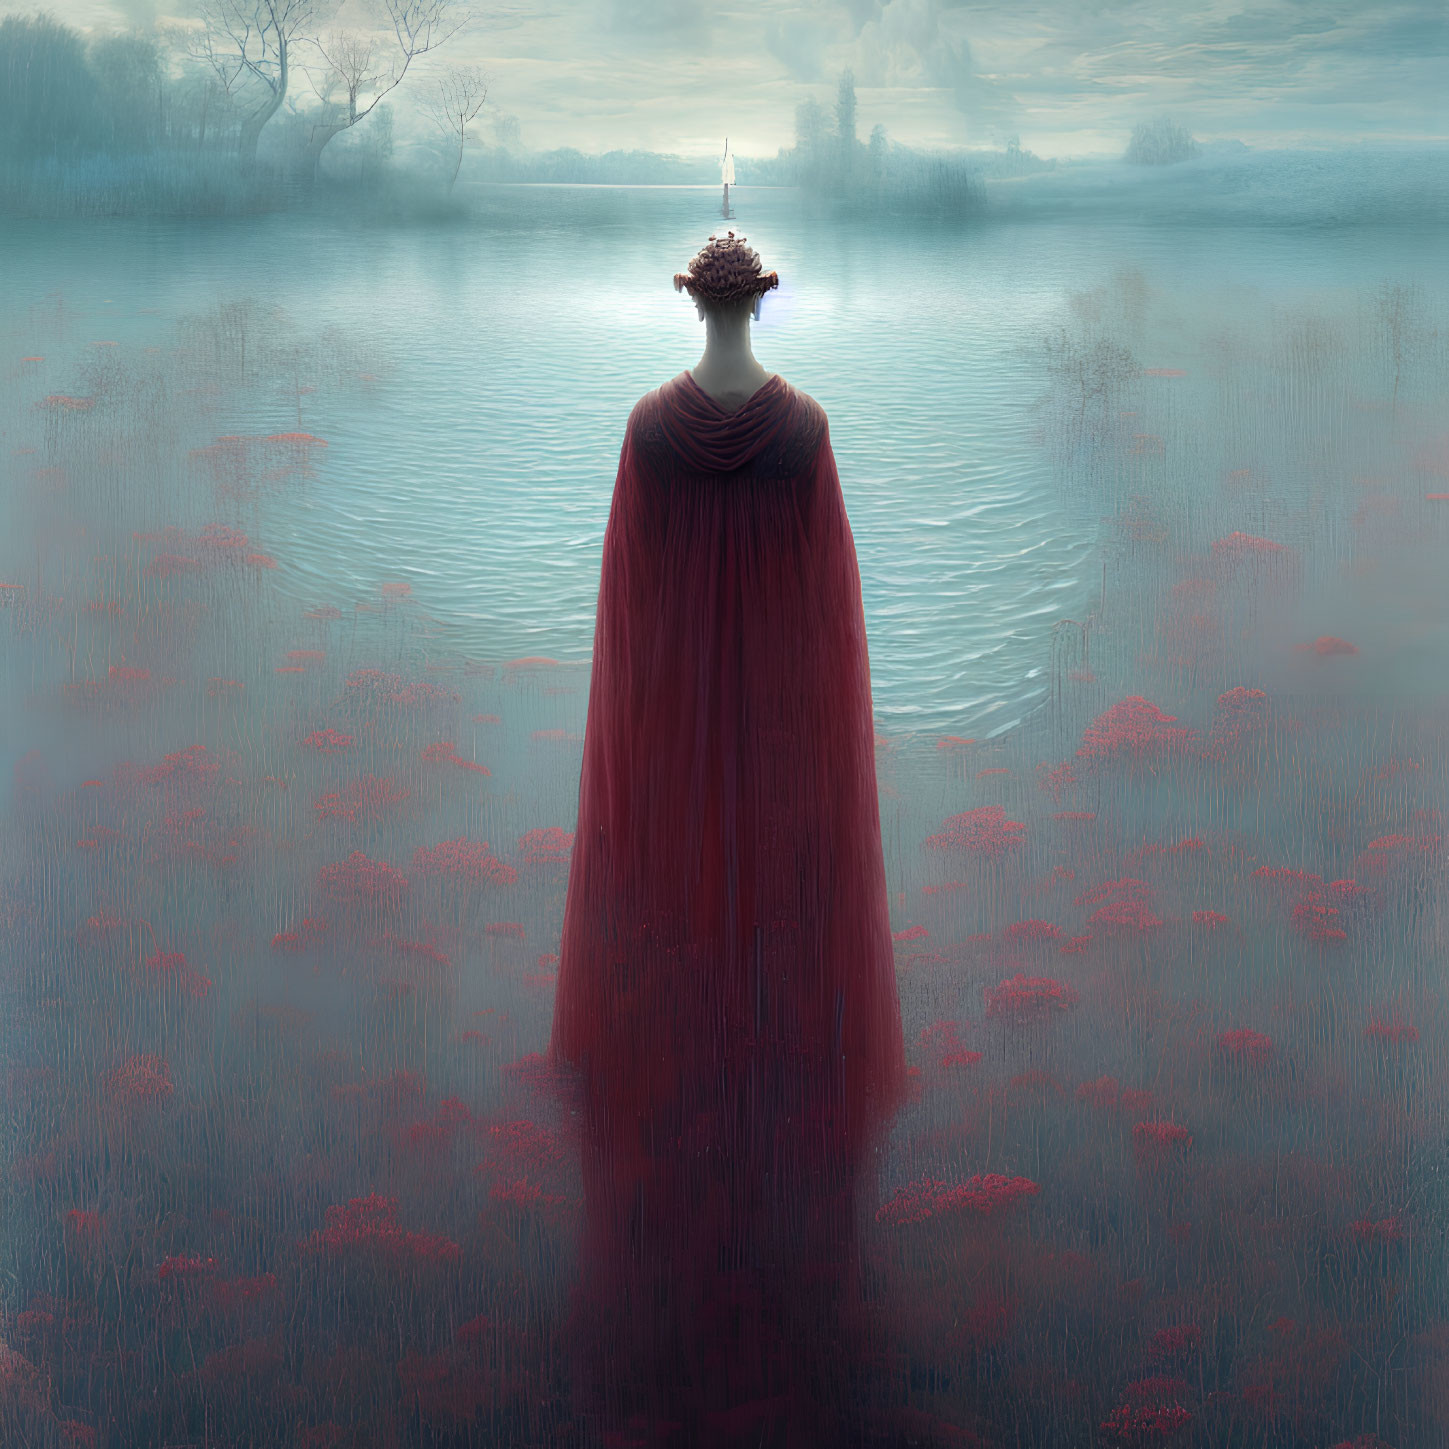 Figure in Red Cloak by Tranquil Lake with Lighthouse View